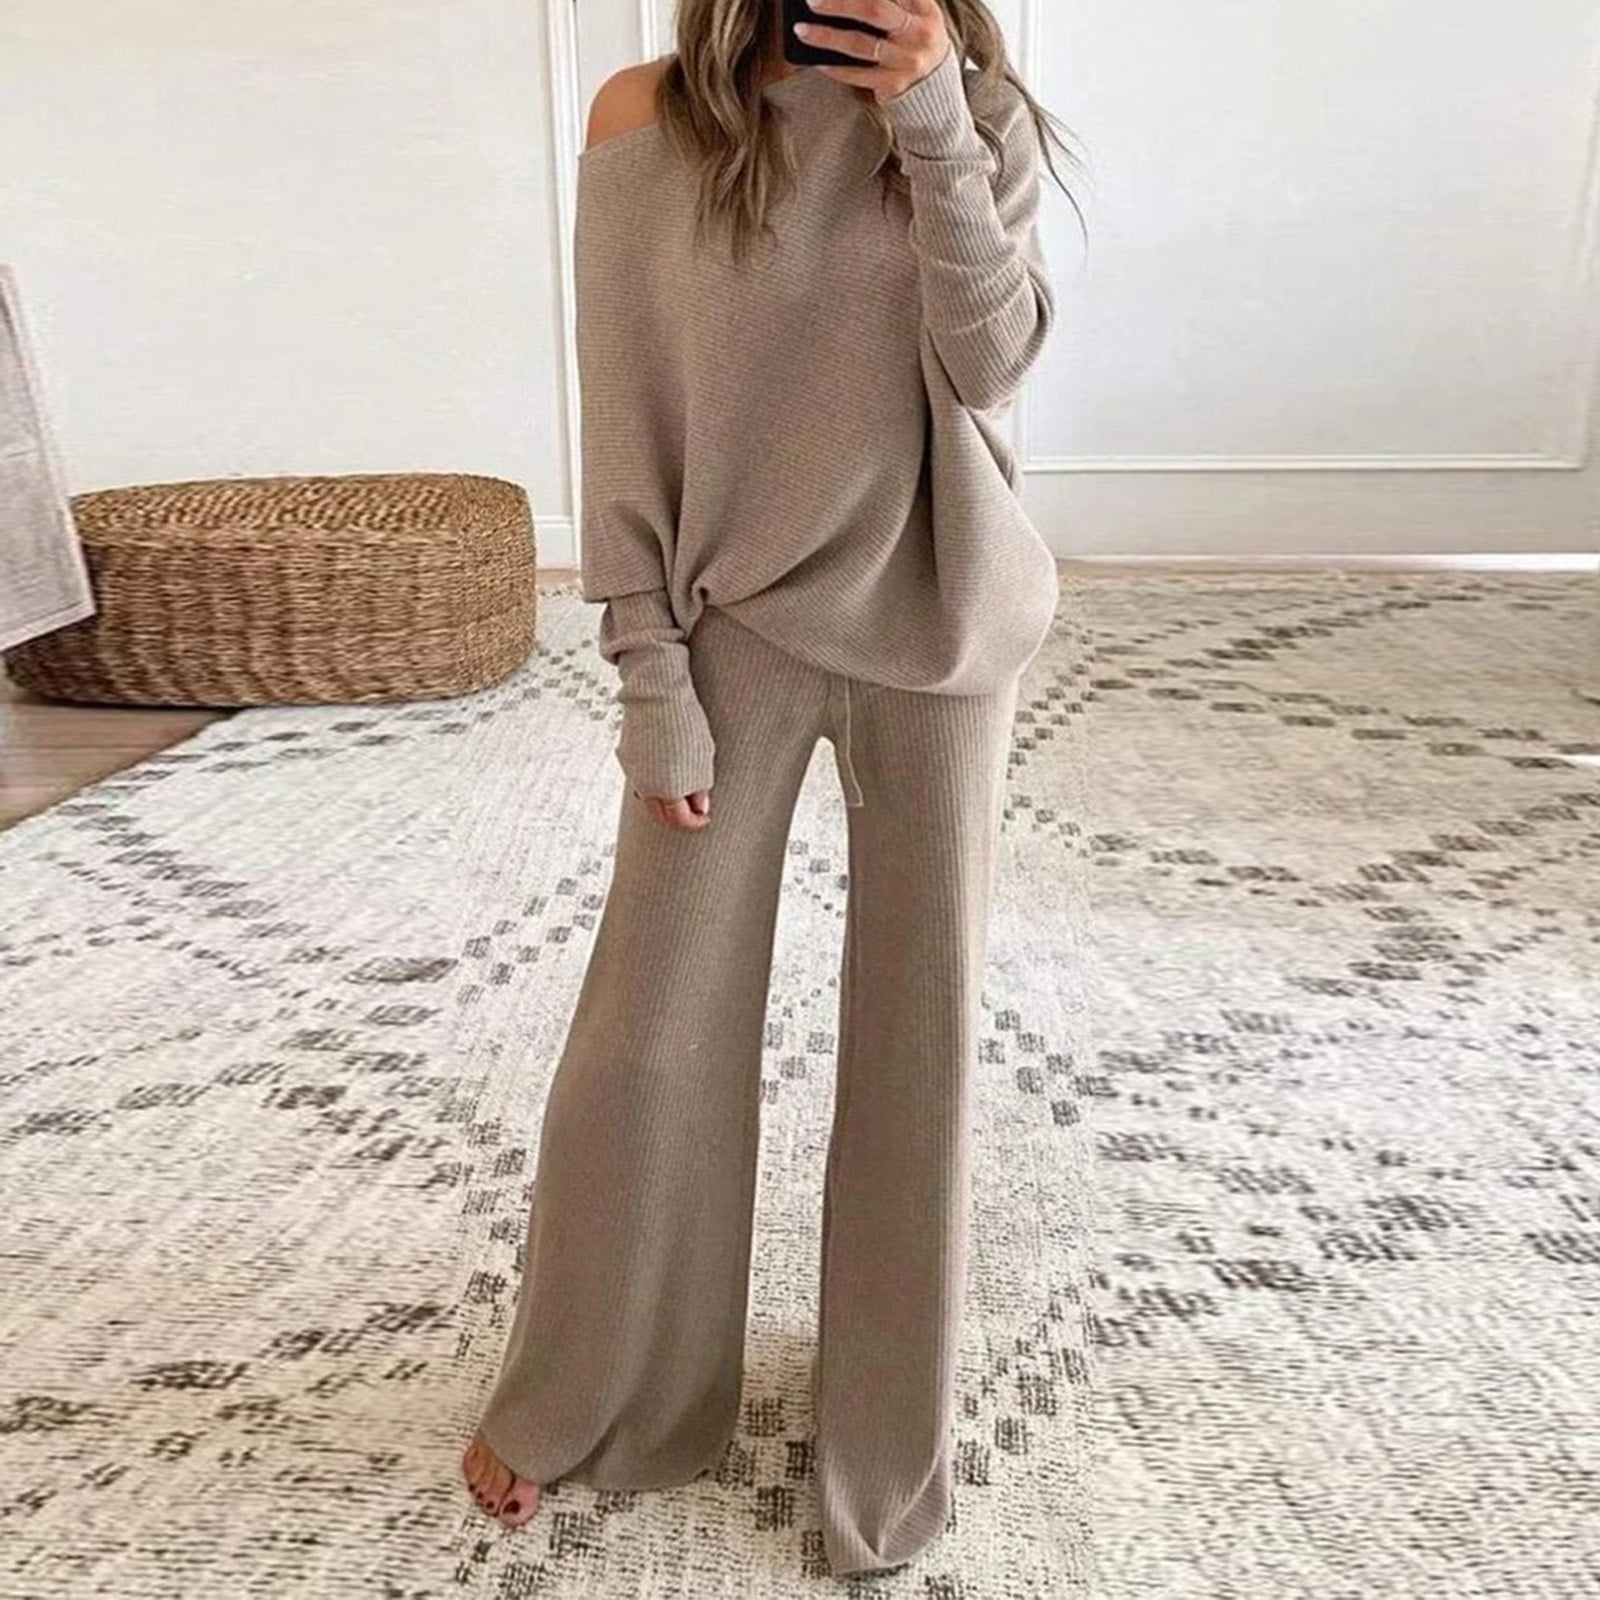 RYDCOT Lounge Sets for Women Petite 2 Piece Long Pants Knit Sweater Sets  Long Sleeve Knit Top and Wide Leg Pants Winter Outfits for Women Set on